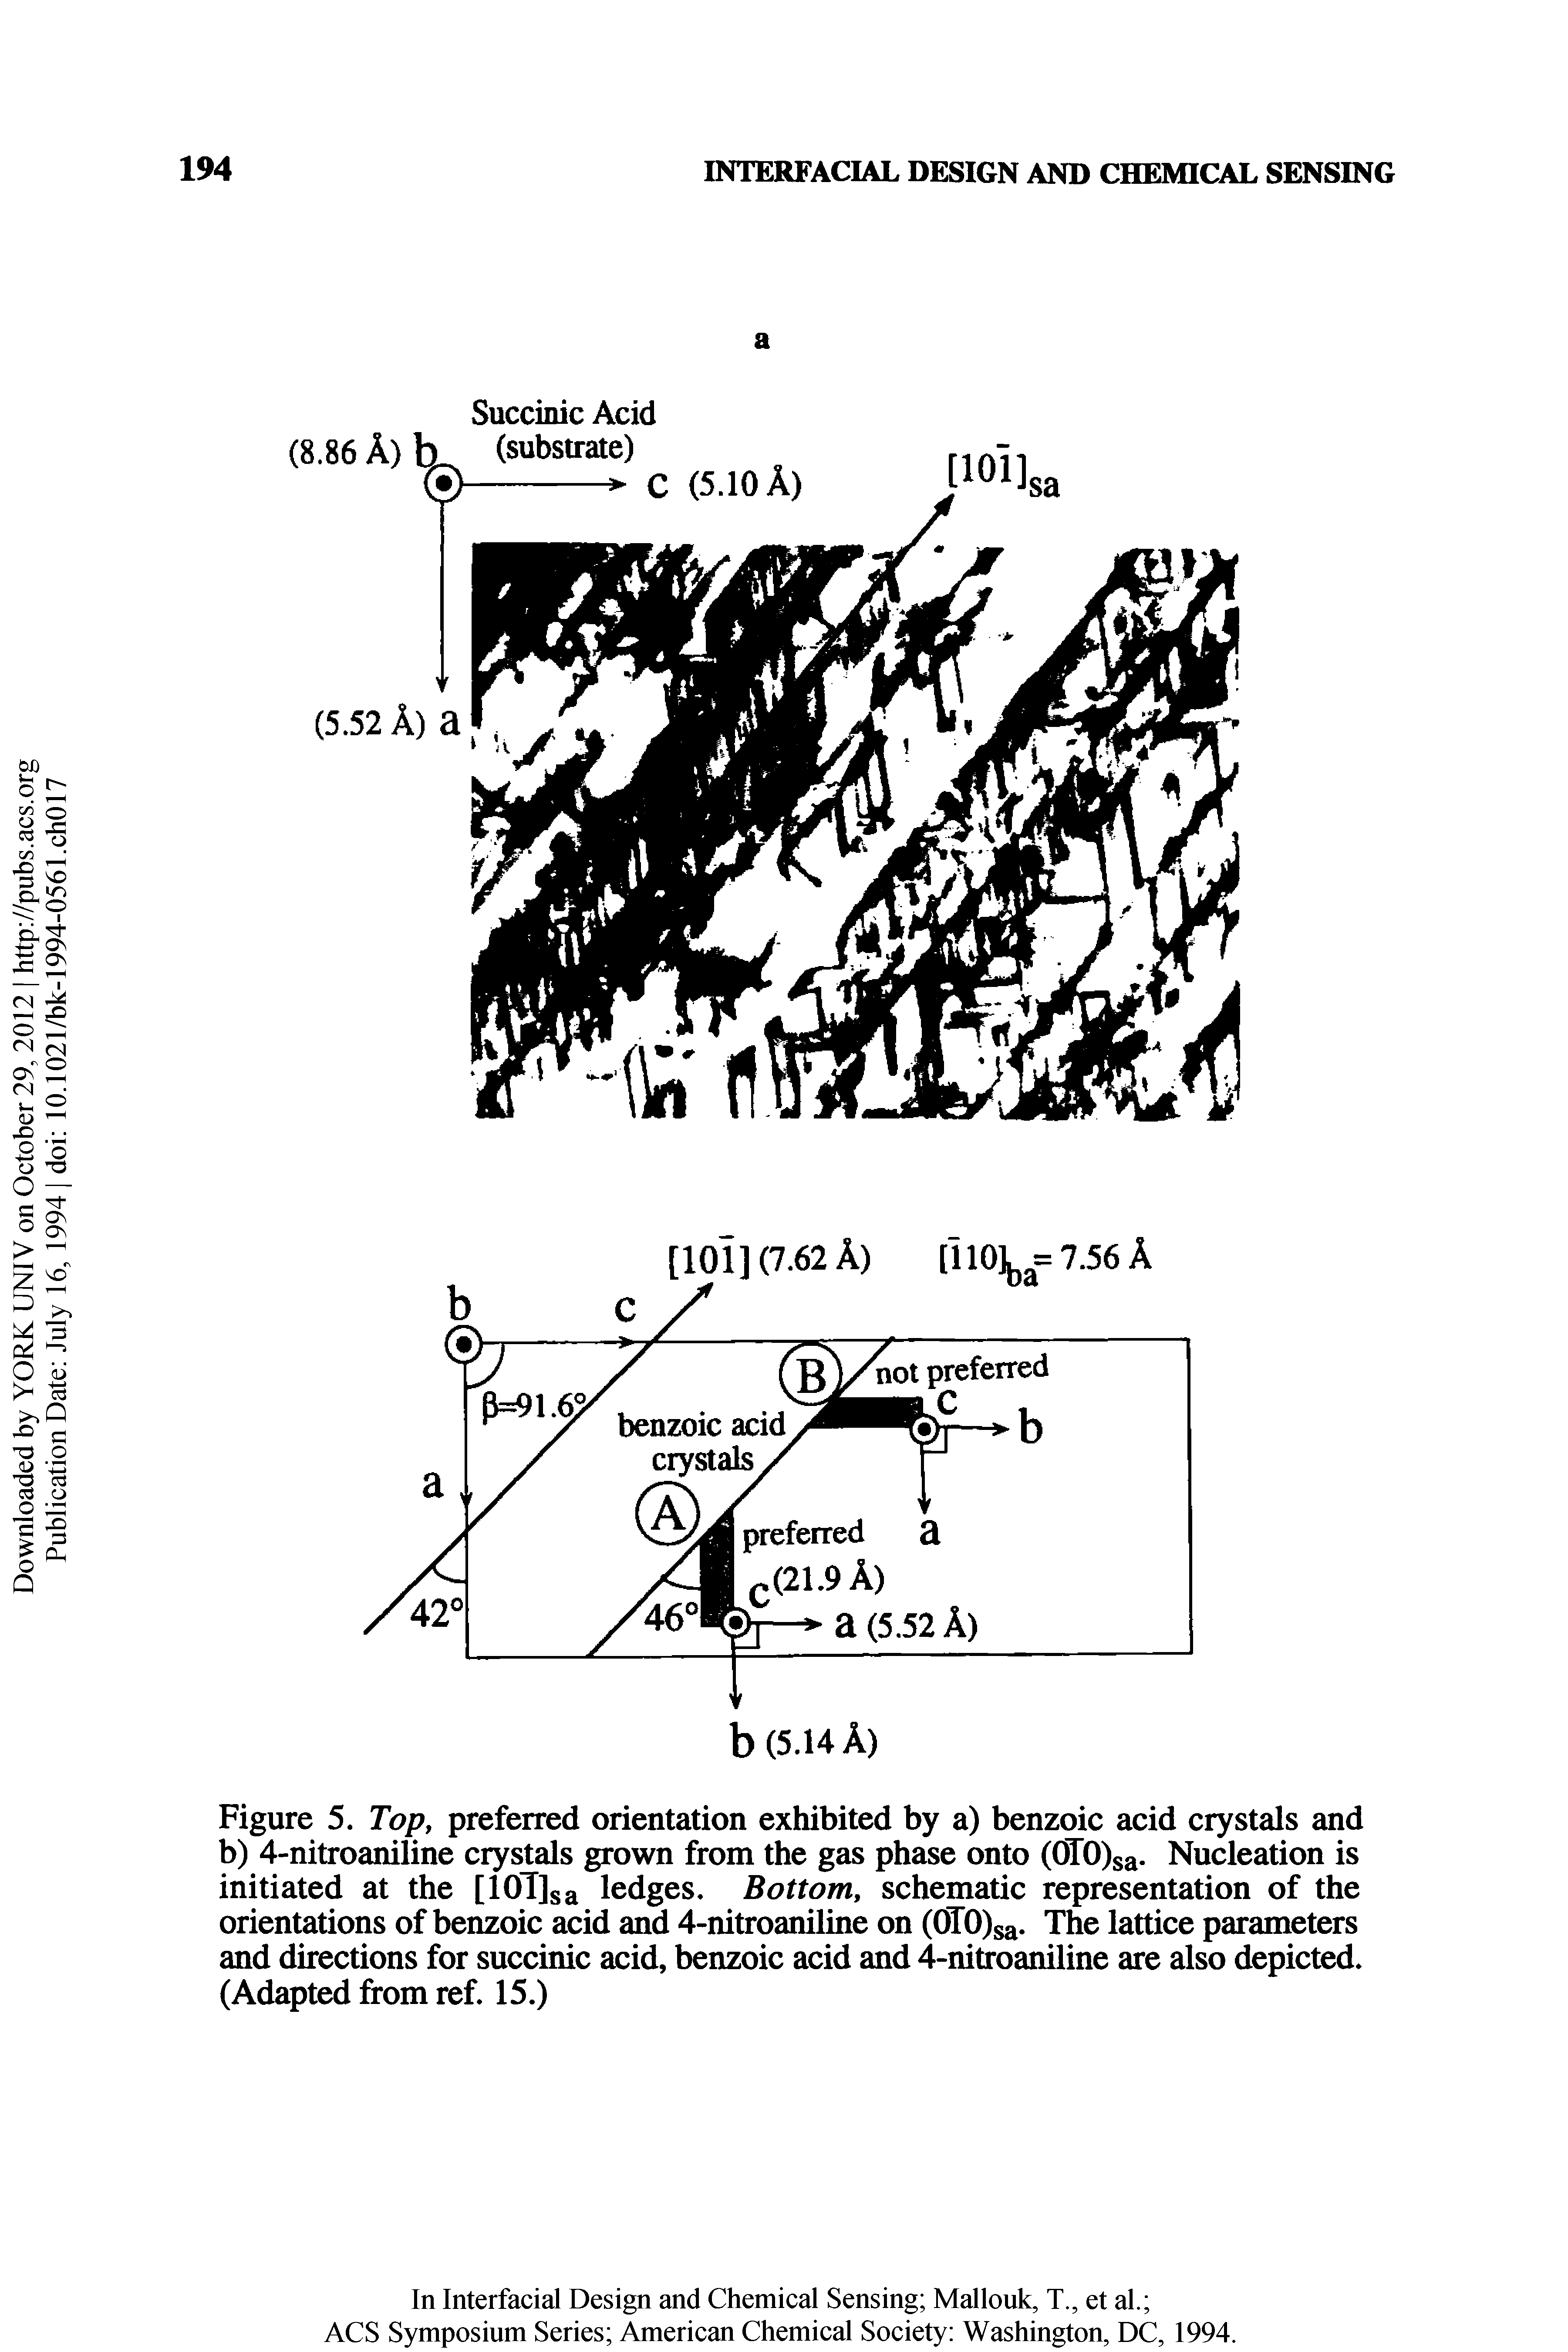 Figure 5. Top, preferred orientation exhibited by a) benzoic acid crystals and b) 4-nitroaniline crystals grown from the gas phase onto (OTO)sa- Nucleation is initiated at the [10T]sa ledges. Bottom, schematic representation of the orientations of benzoic acid and 4-nitroaniline on (OTO)sa. The lattice parameters and directions for succinic acid, benzoic acid and 4-nitroaniline are also depicted. (Adapted from ref. 15.)...